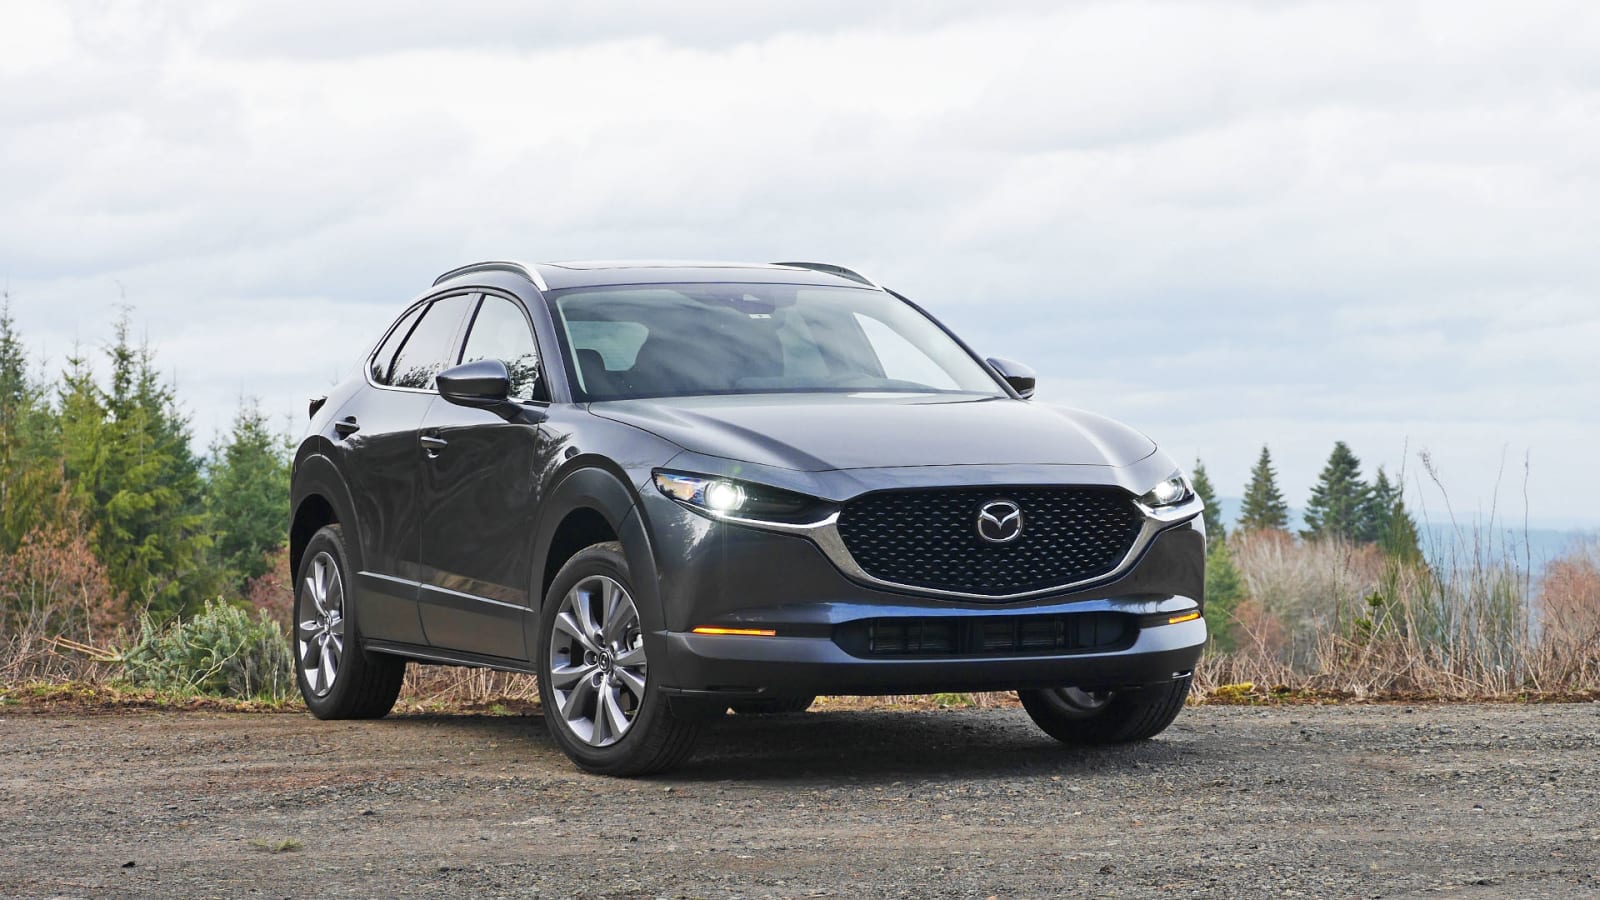 2021 Mazda CX-5 Review | Prices, specs, features and photos | Autoblog